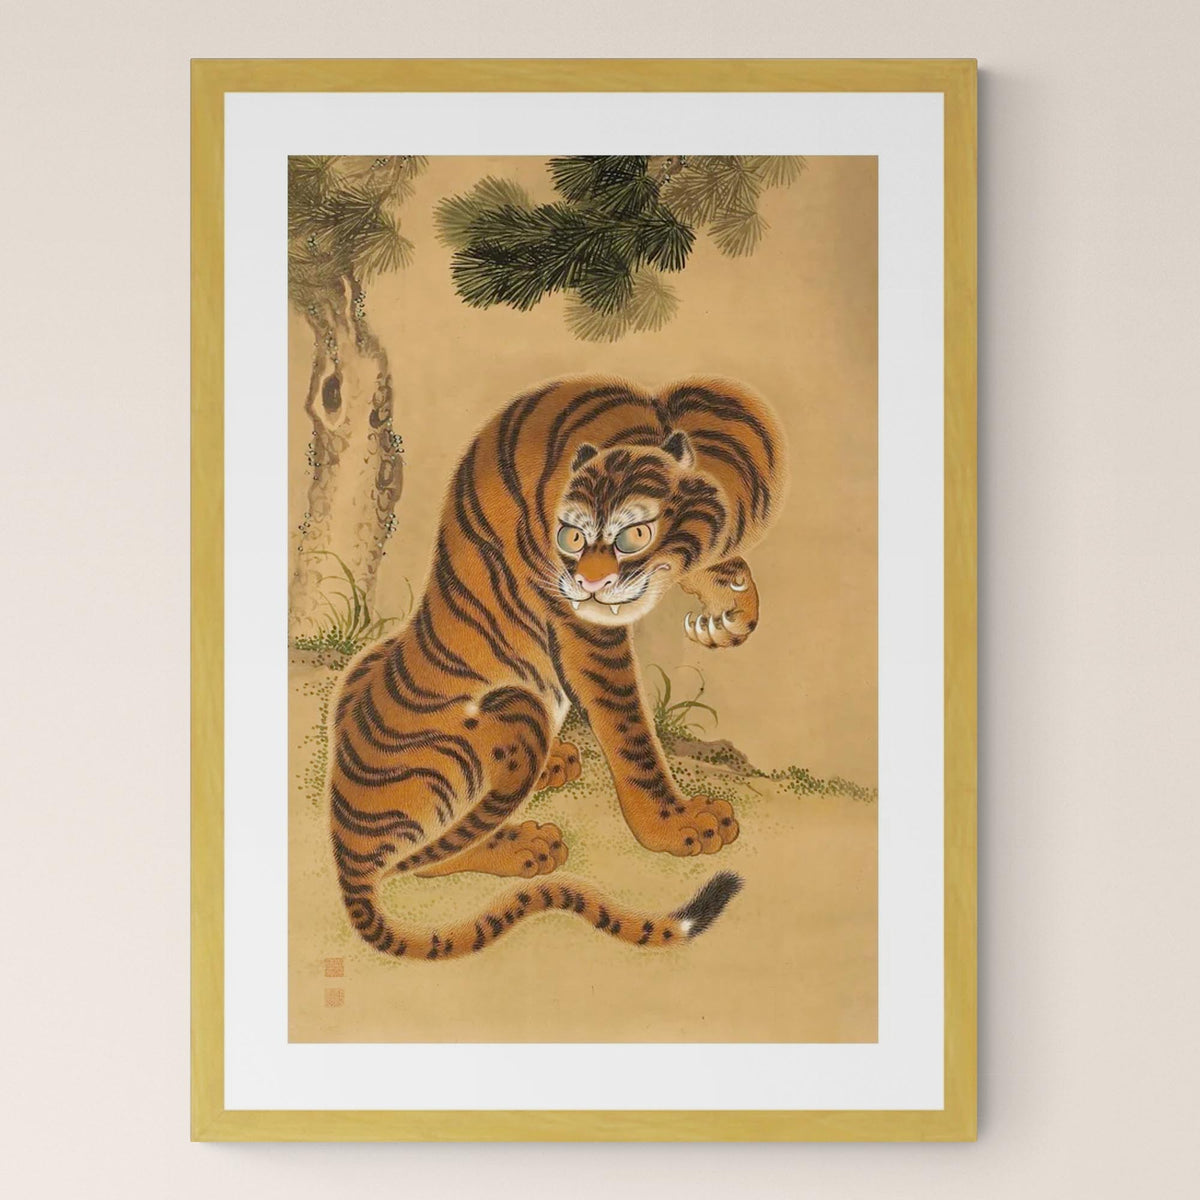 Exquisite Tiger Cleaning its Paw: Japanese Sumi-e Art, Asian Animal Nature Wildlife Jungle Antique Vintage Framed Print - Sacred Surreal